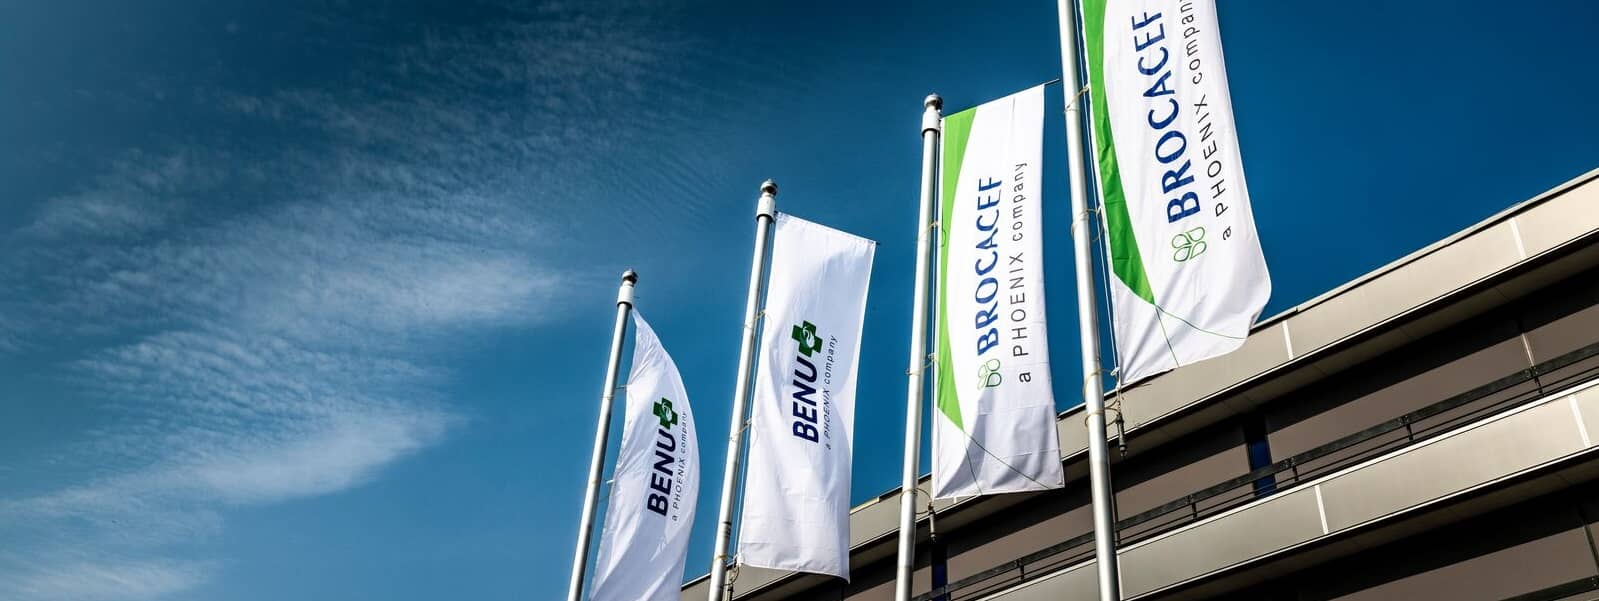 Flags front of Brocacef Group headquarters